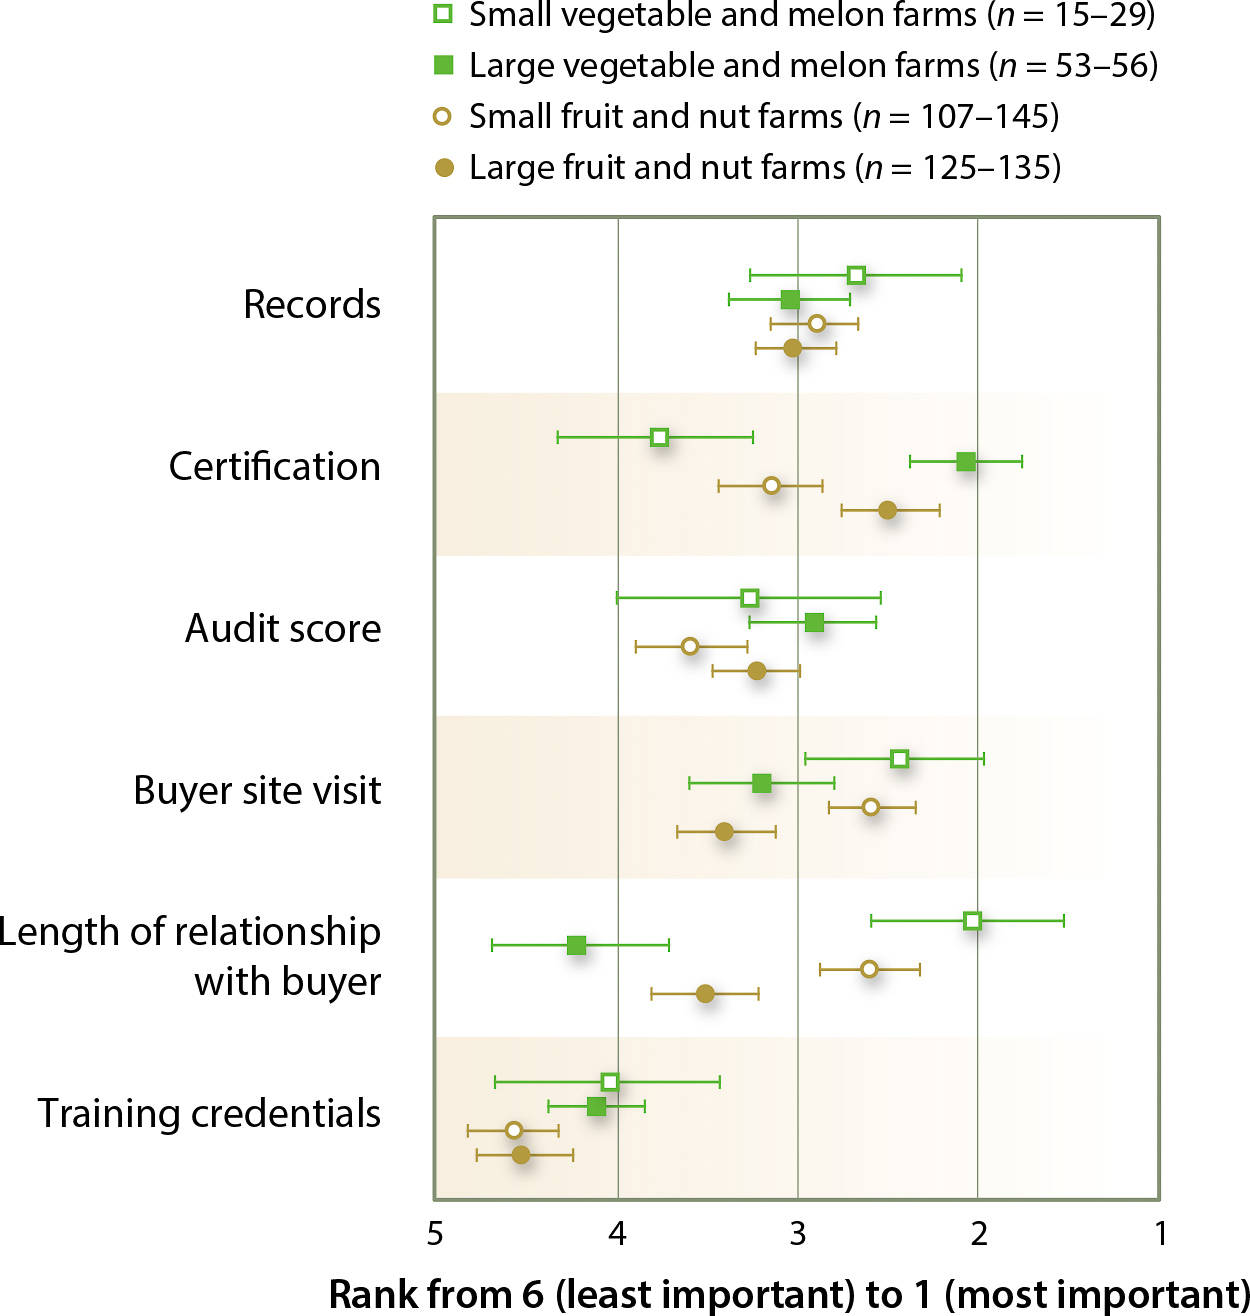 Factors of importance in resolving buyer food safety concerns. The vertical axis measures the average rank for each factor by grower group. n values vary as not all respondents chose to rank all six factors, see legend. Error bars represent 95% confidence intervals, estimated using a bootstrap method with case resampling.